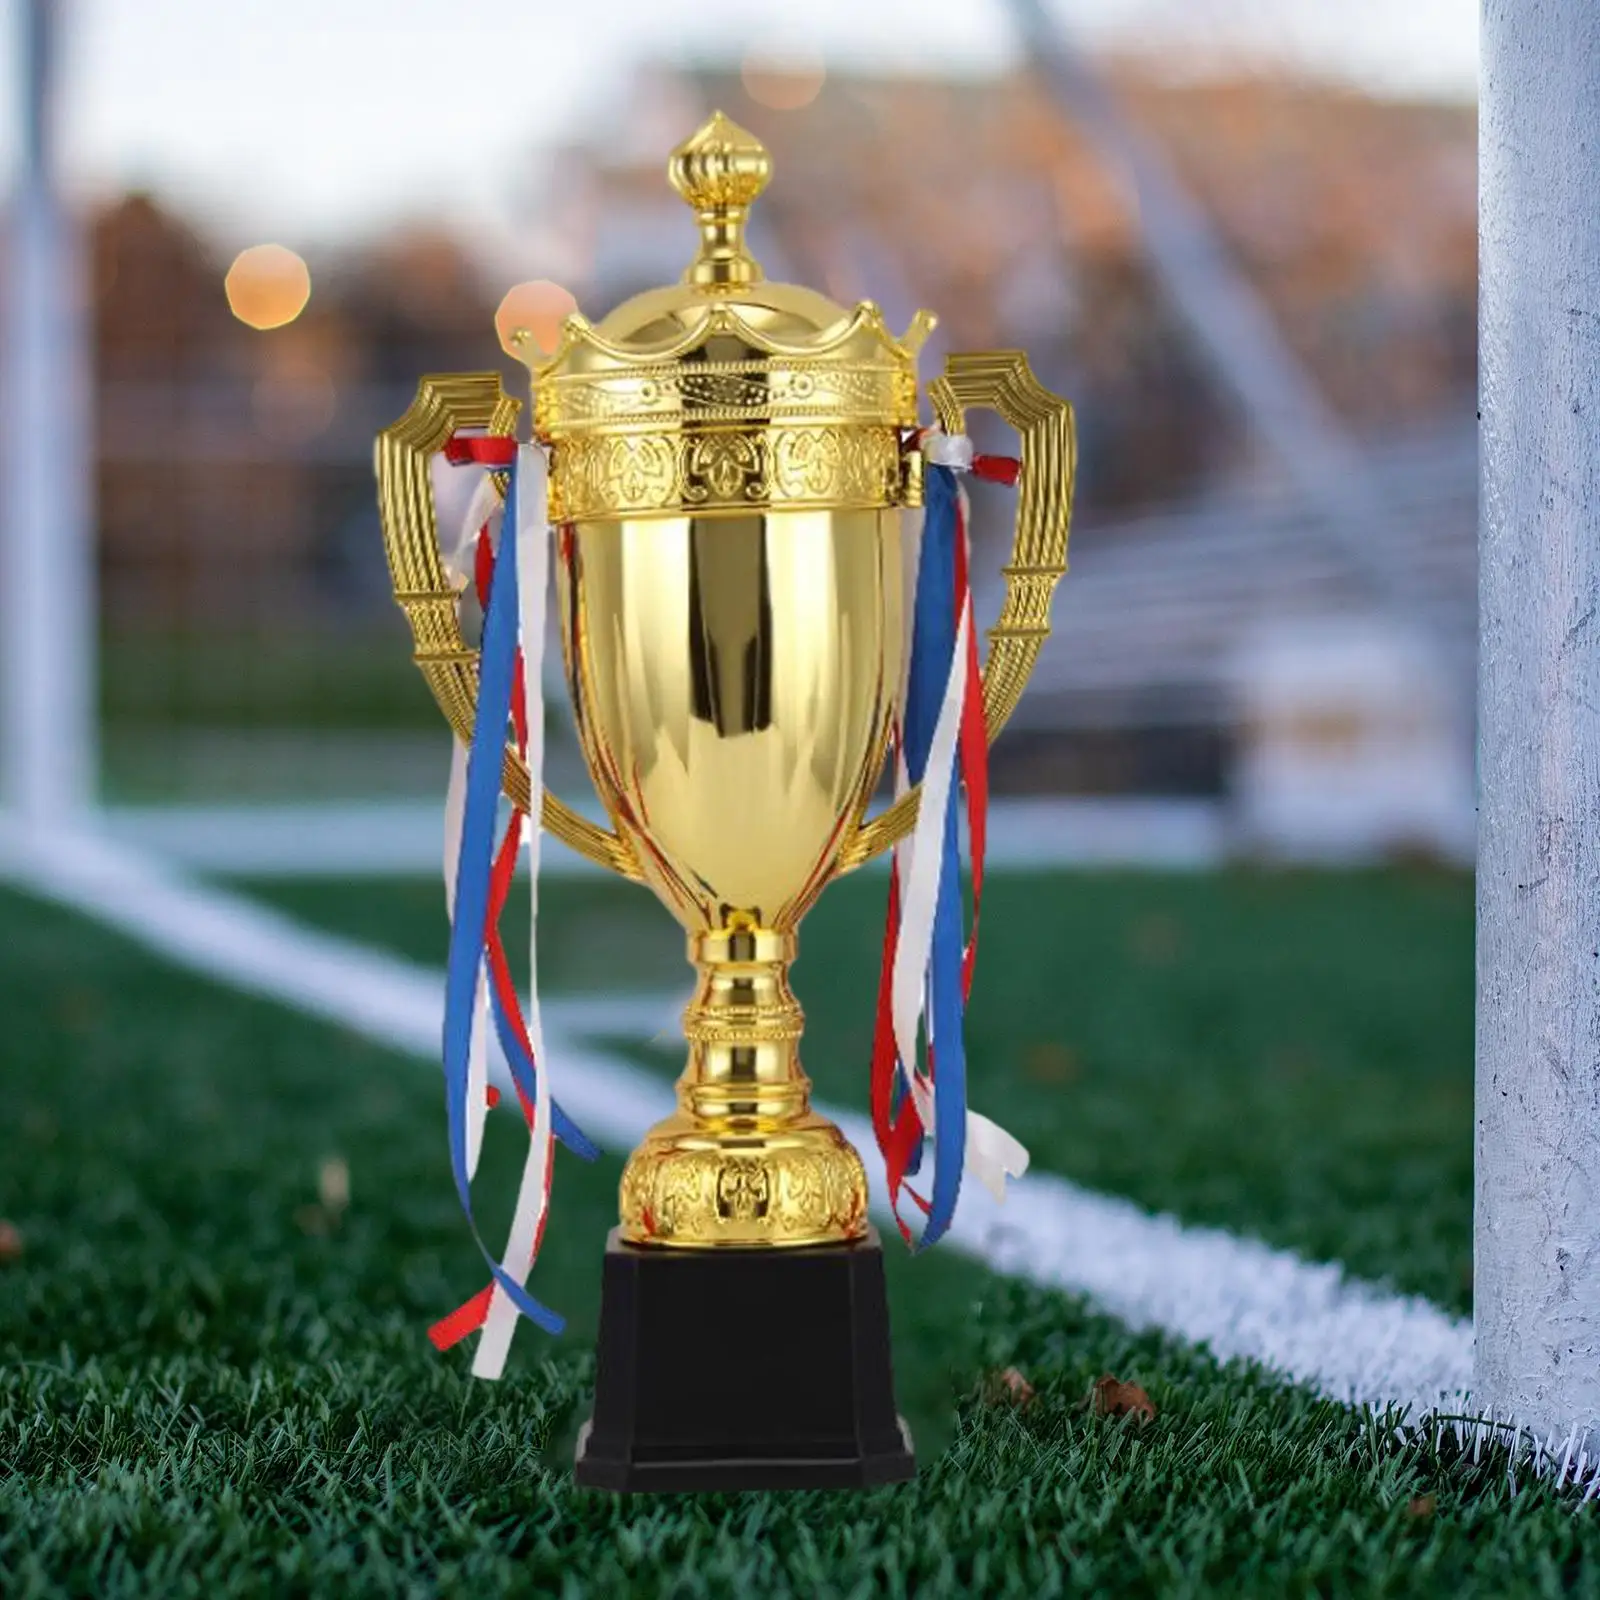 Award Trophy Cup Fine Workmanship Funny Trophy Children Trophy for Award Ceremonies Competitions Party Favors Football Rewards